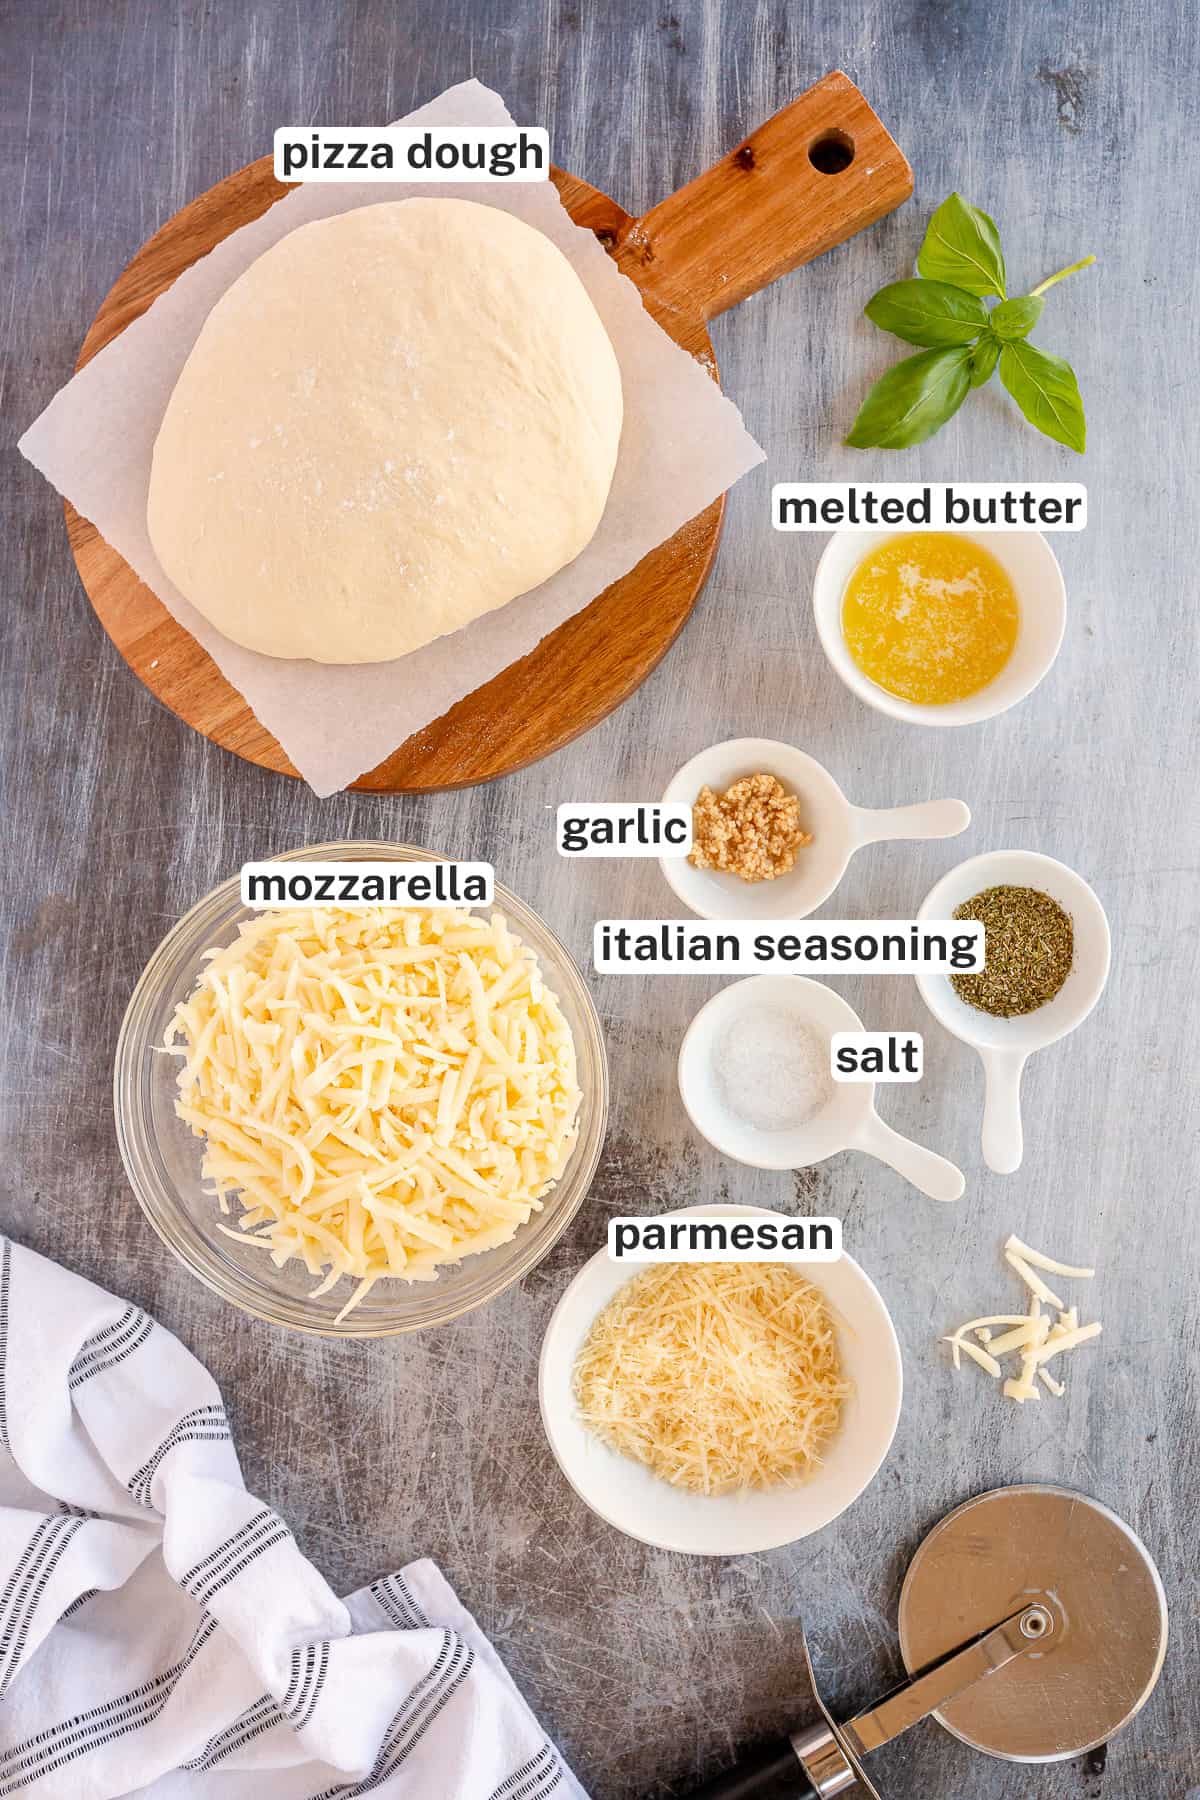 Pizza dough with other ingredients for making Homemade Cheesy Breadsticks with text titles.